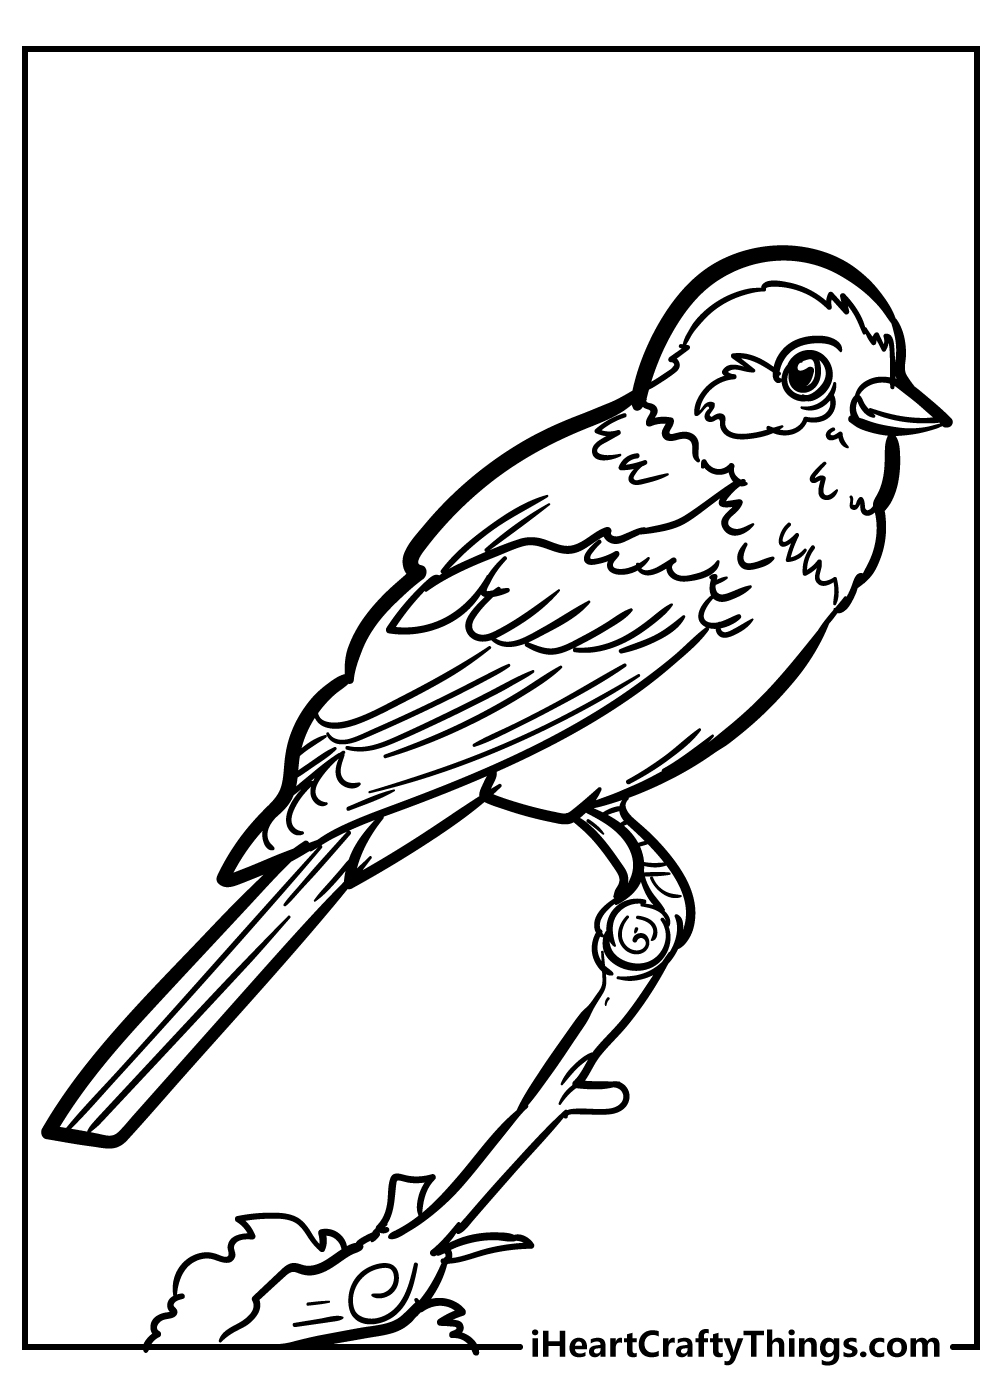 Unique Bird Coloring Pages Updated 20